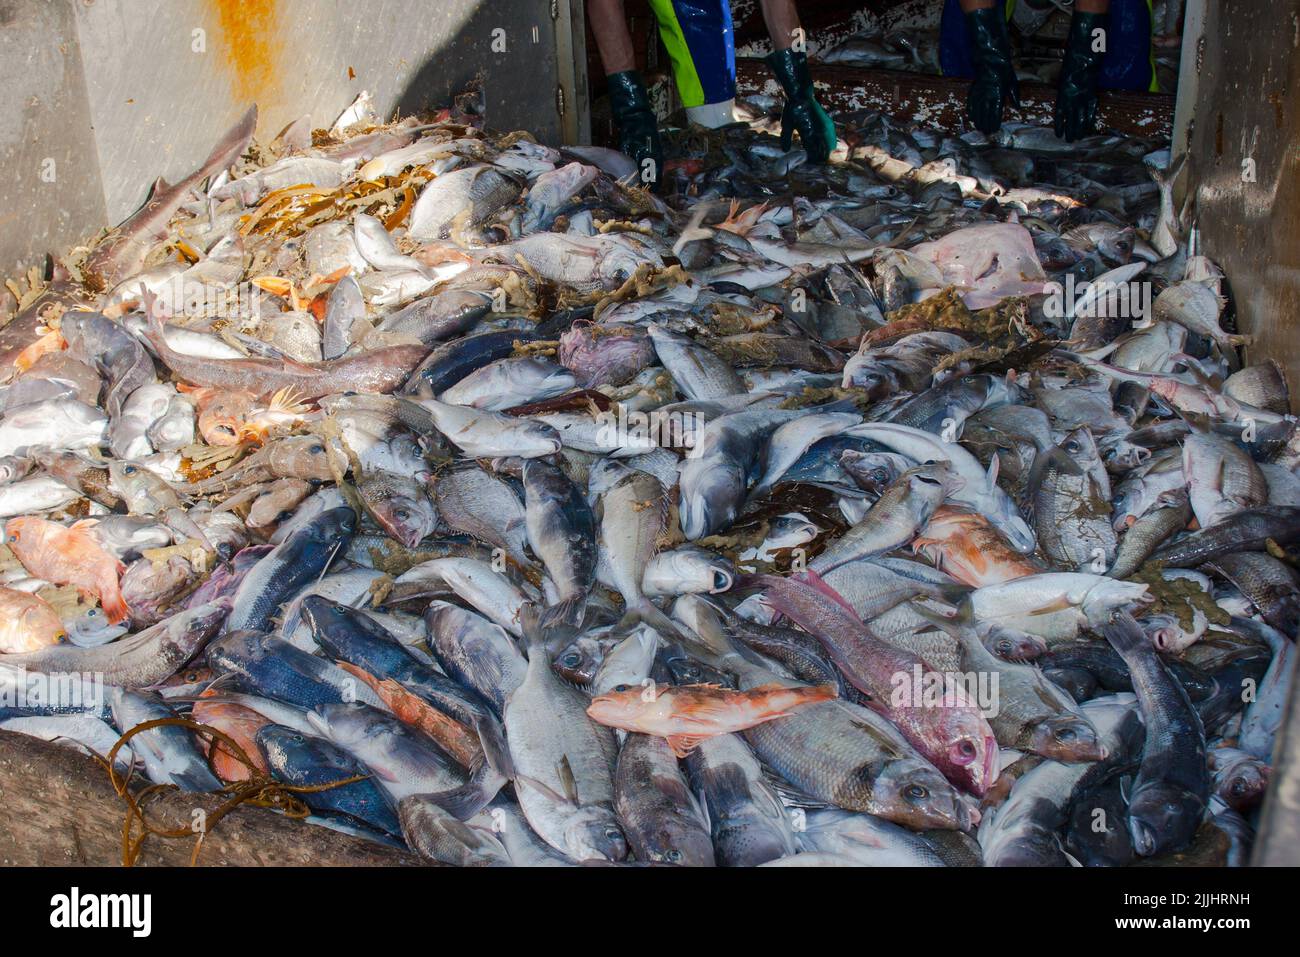 A Look at life in New Zealand: Freshly landed catch, from a deep-sea fishing trawler: Stock Photo